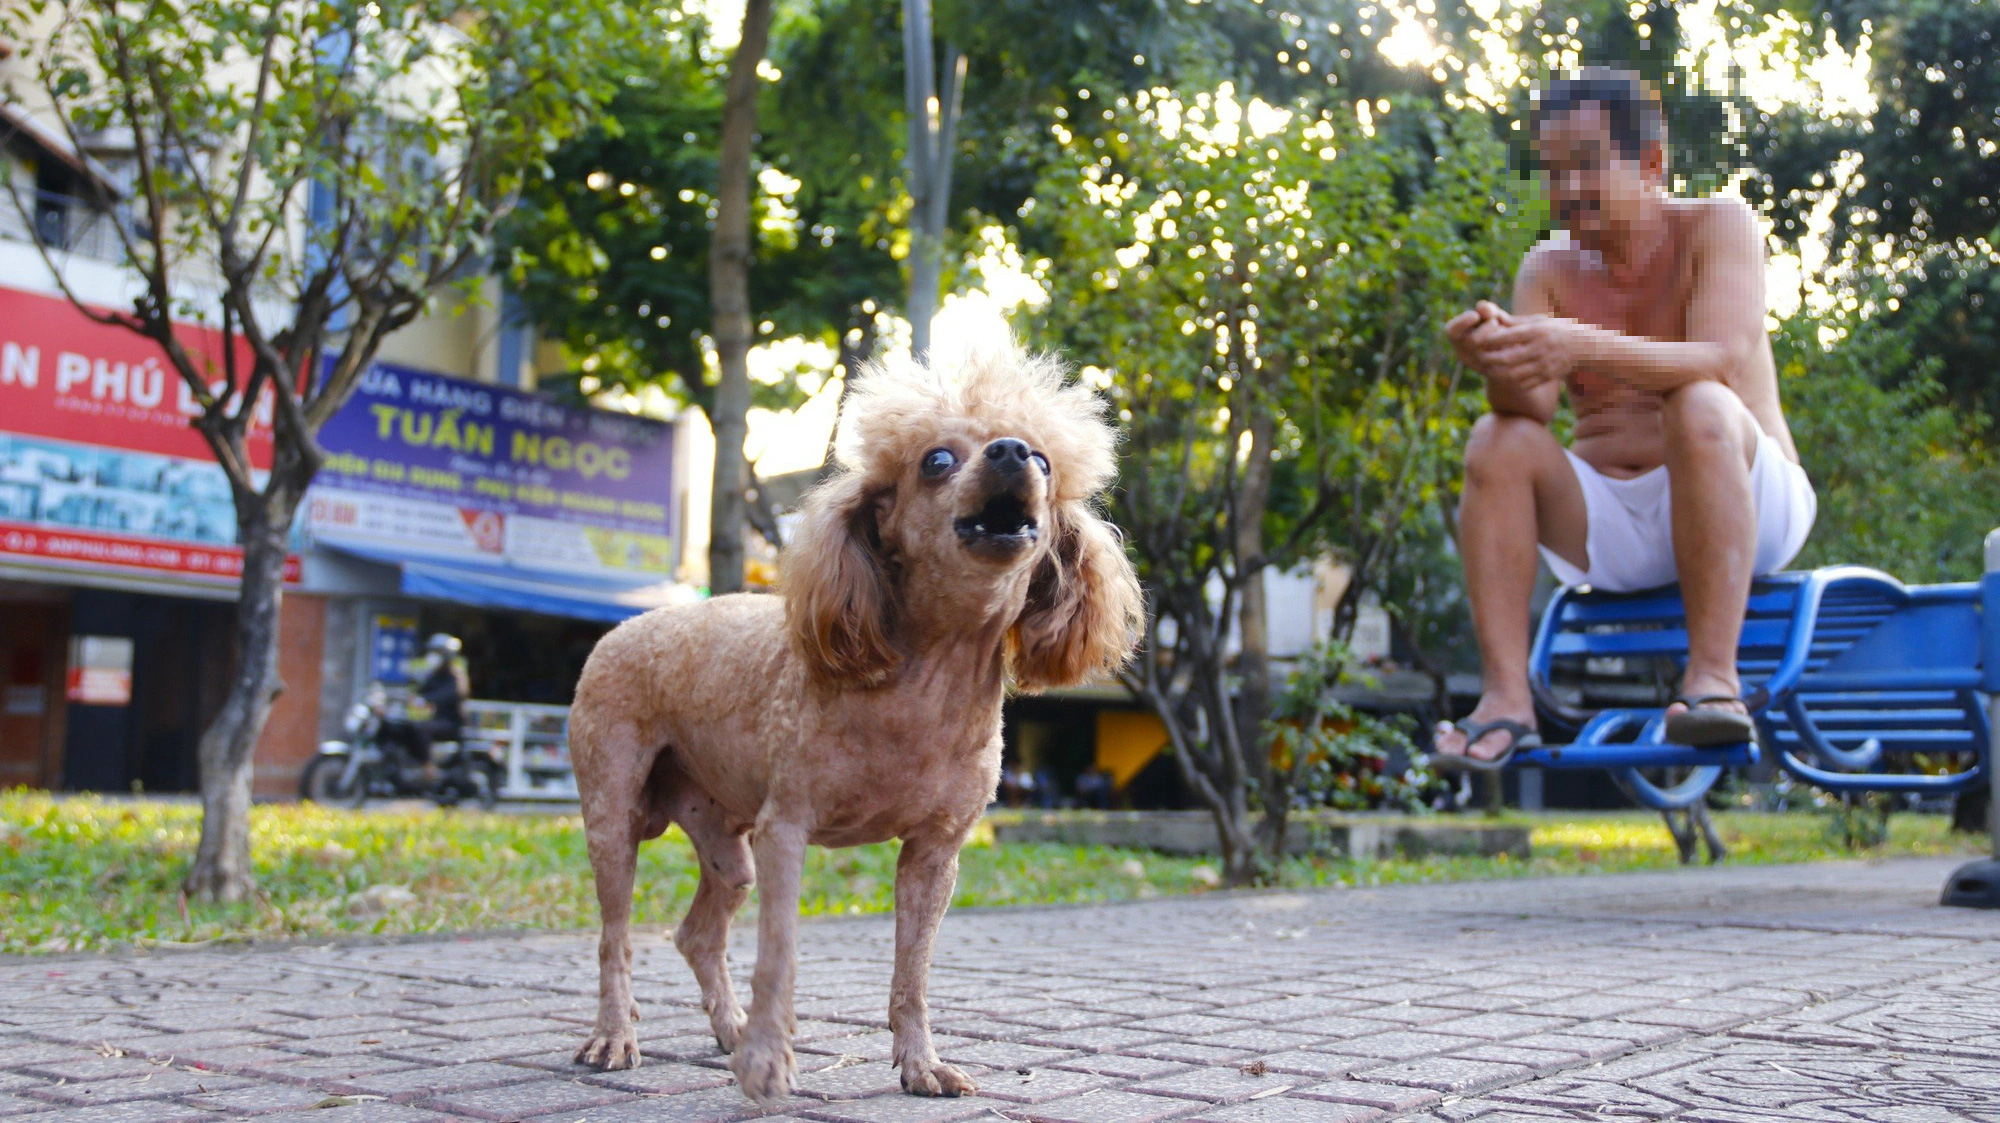 A dog roams freely at a park in Ho Chi Minh City. Photo: Tien Quoc / Tuoi Tre